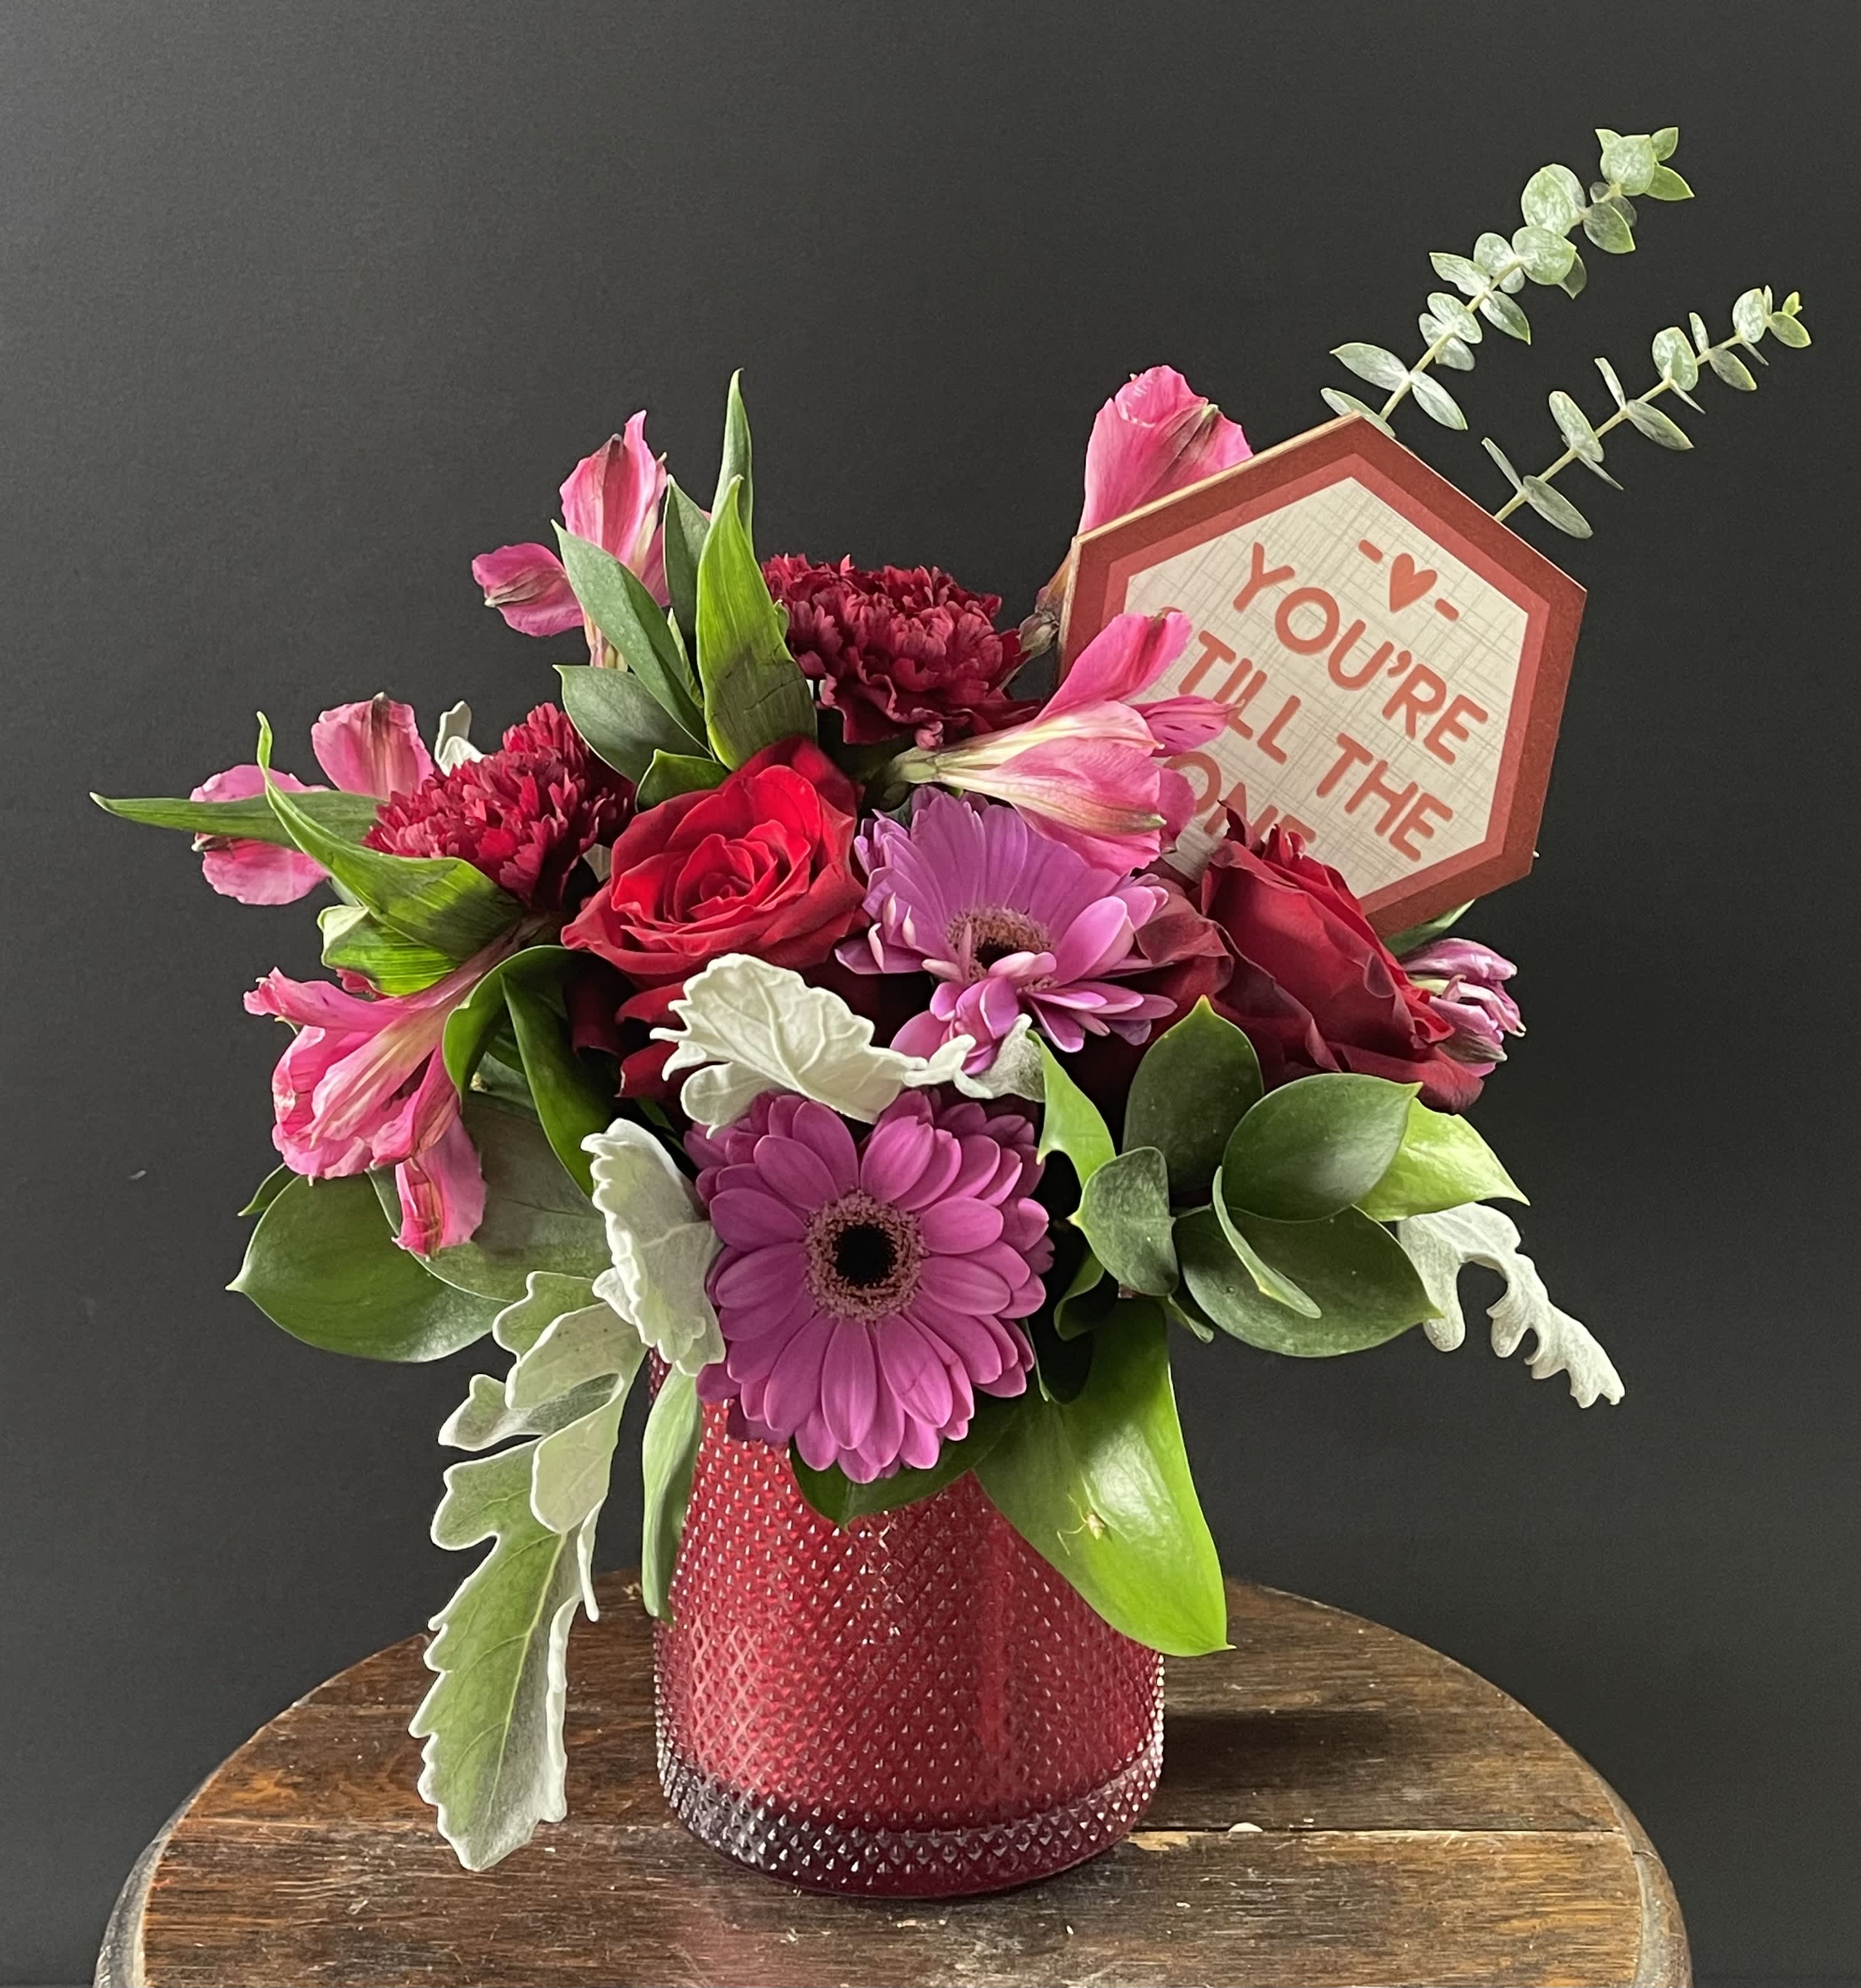 You're Still the One - This adorable arrangement comes with an octagon magnet.  A daily reminder that she is still the one and will always be.